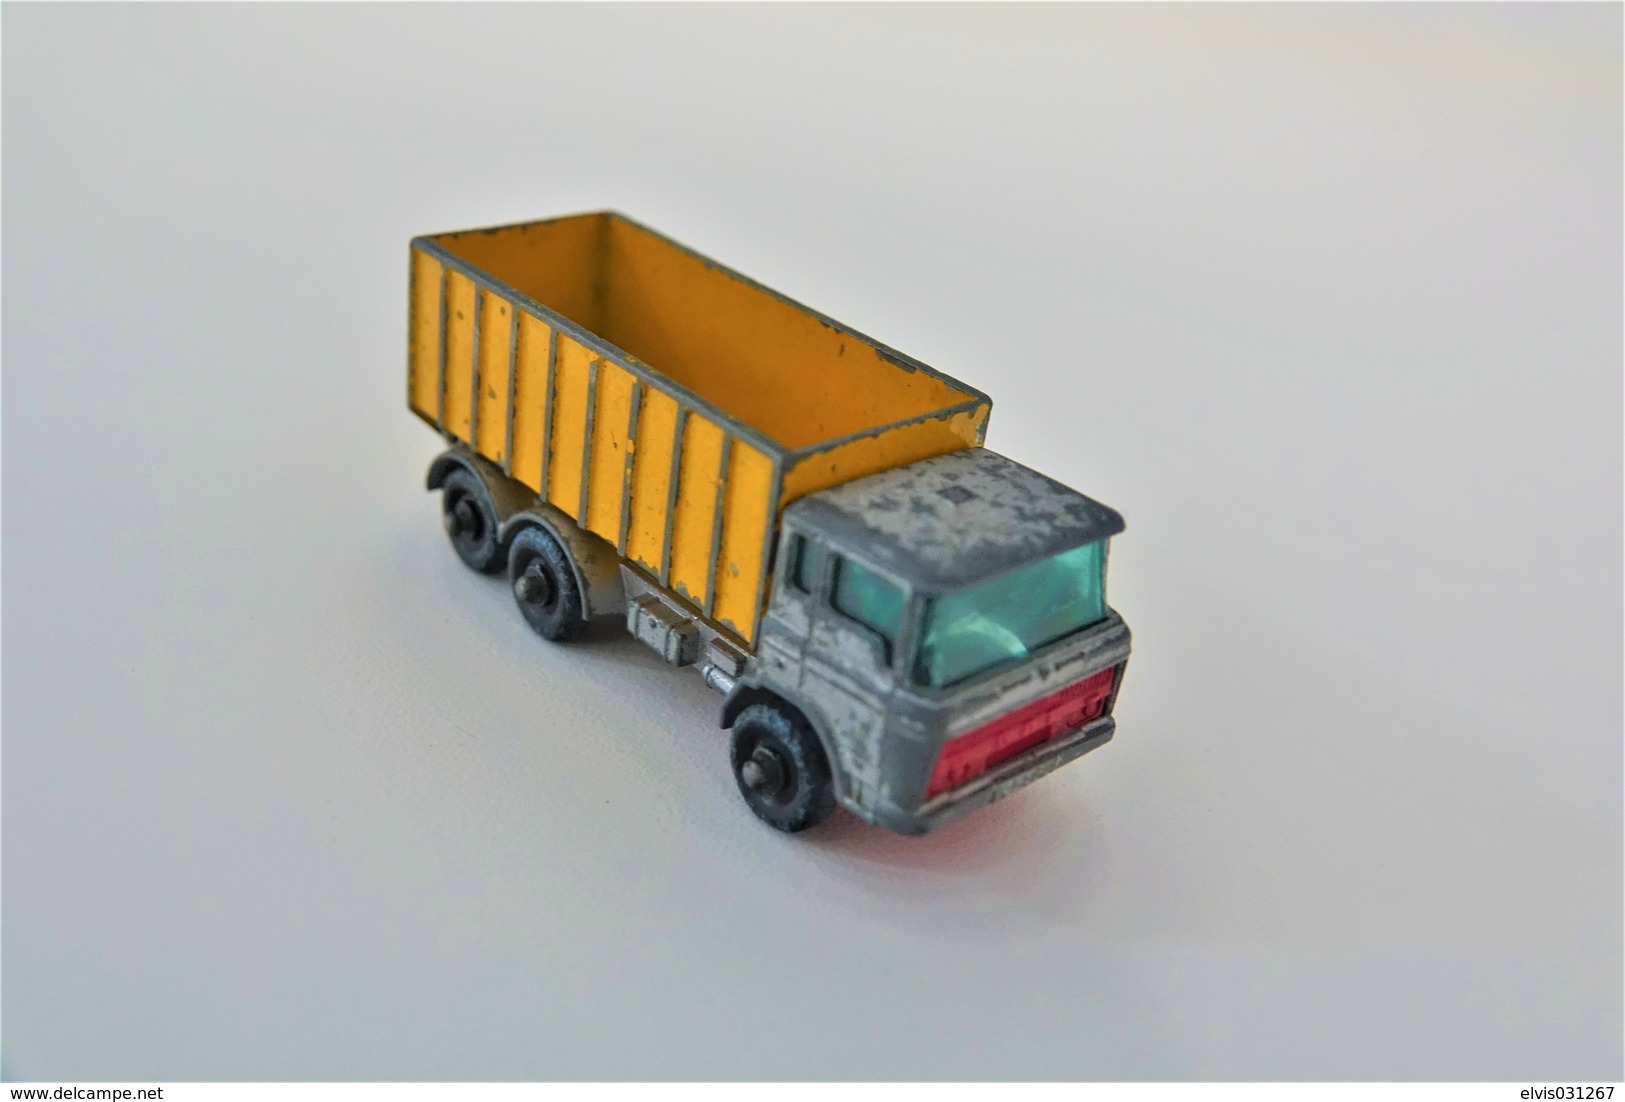 Matchbox Lesney 47C DAF TIPPER CONTAINER TRUCK - Regular Wheels, Issued 1968, Scale 1/64 - Matchbox (Lesney)